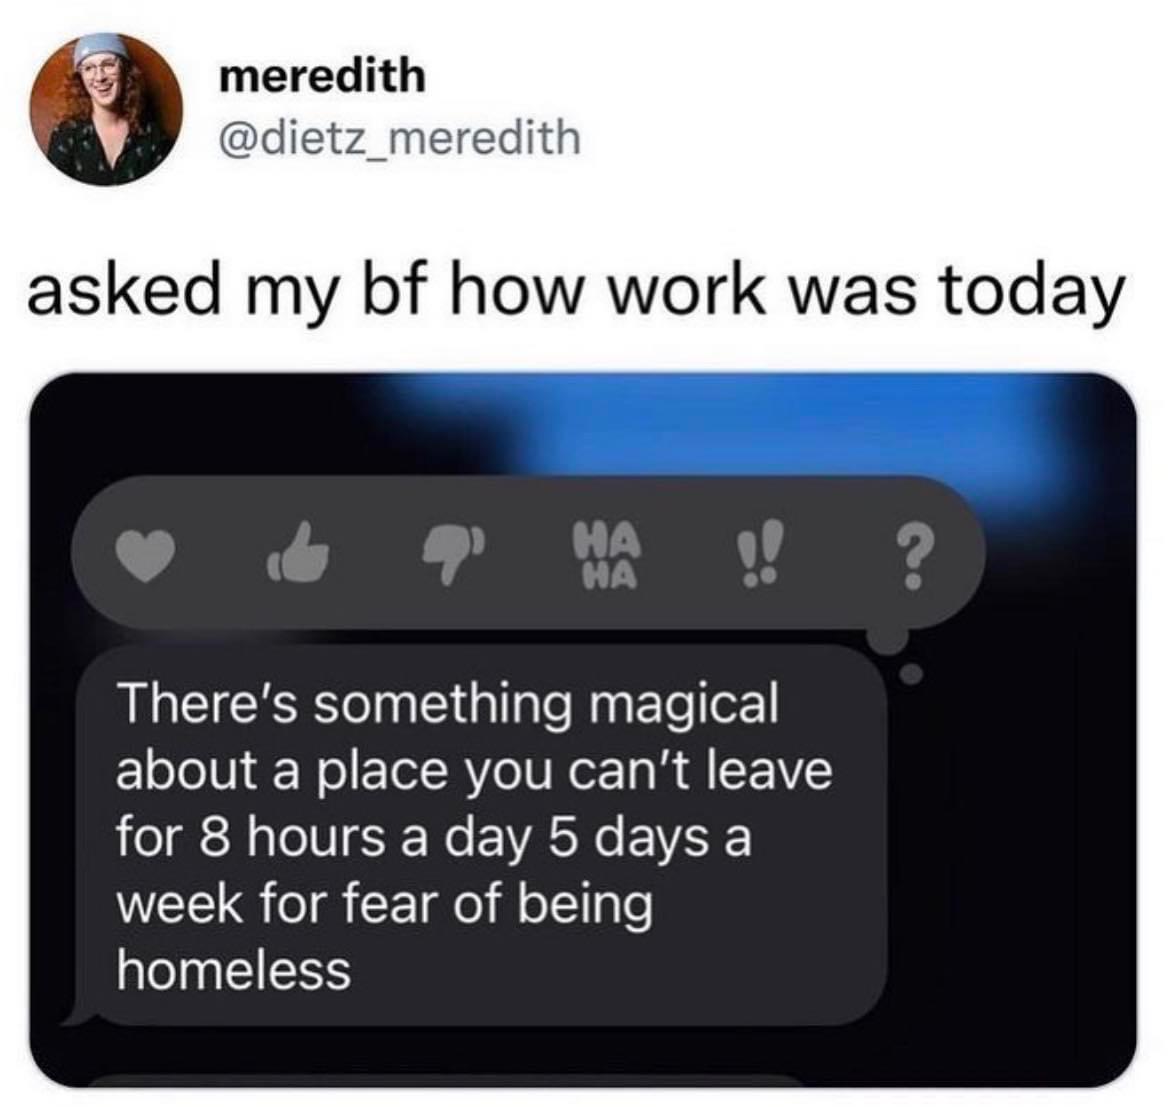 anti-work memes reddit - multimedia - meredith asked my bf how work was today 9' Ha !! ? Ha There's something magical about a place you can't leave for 8 hours a day 5 days a week for fear of being homeless